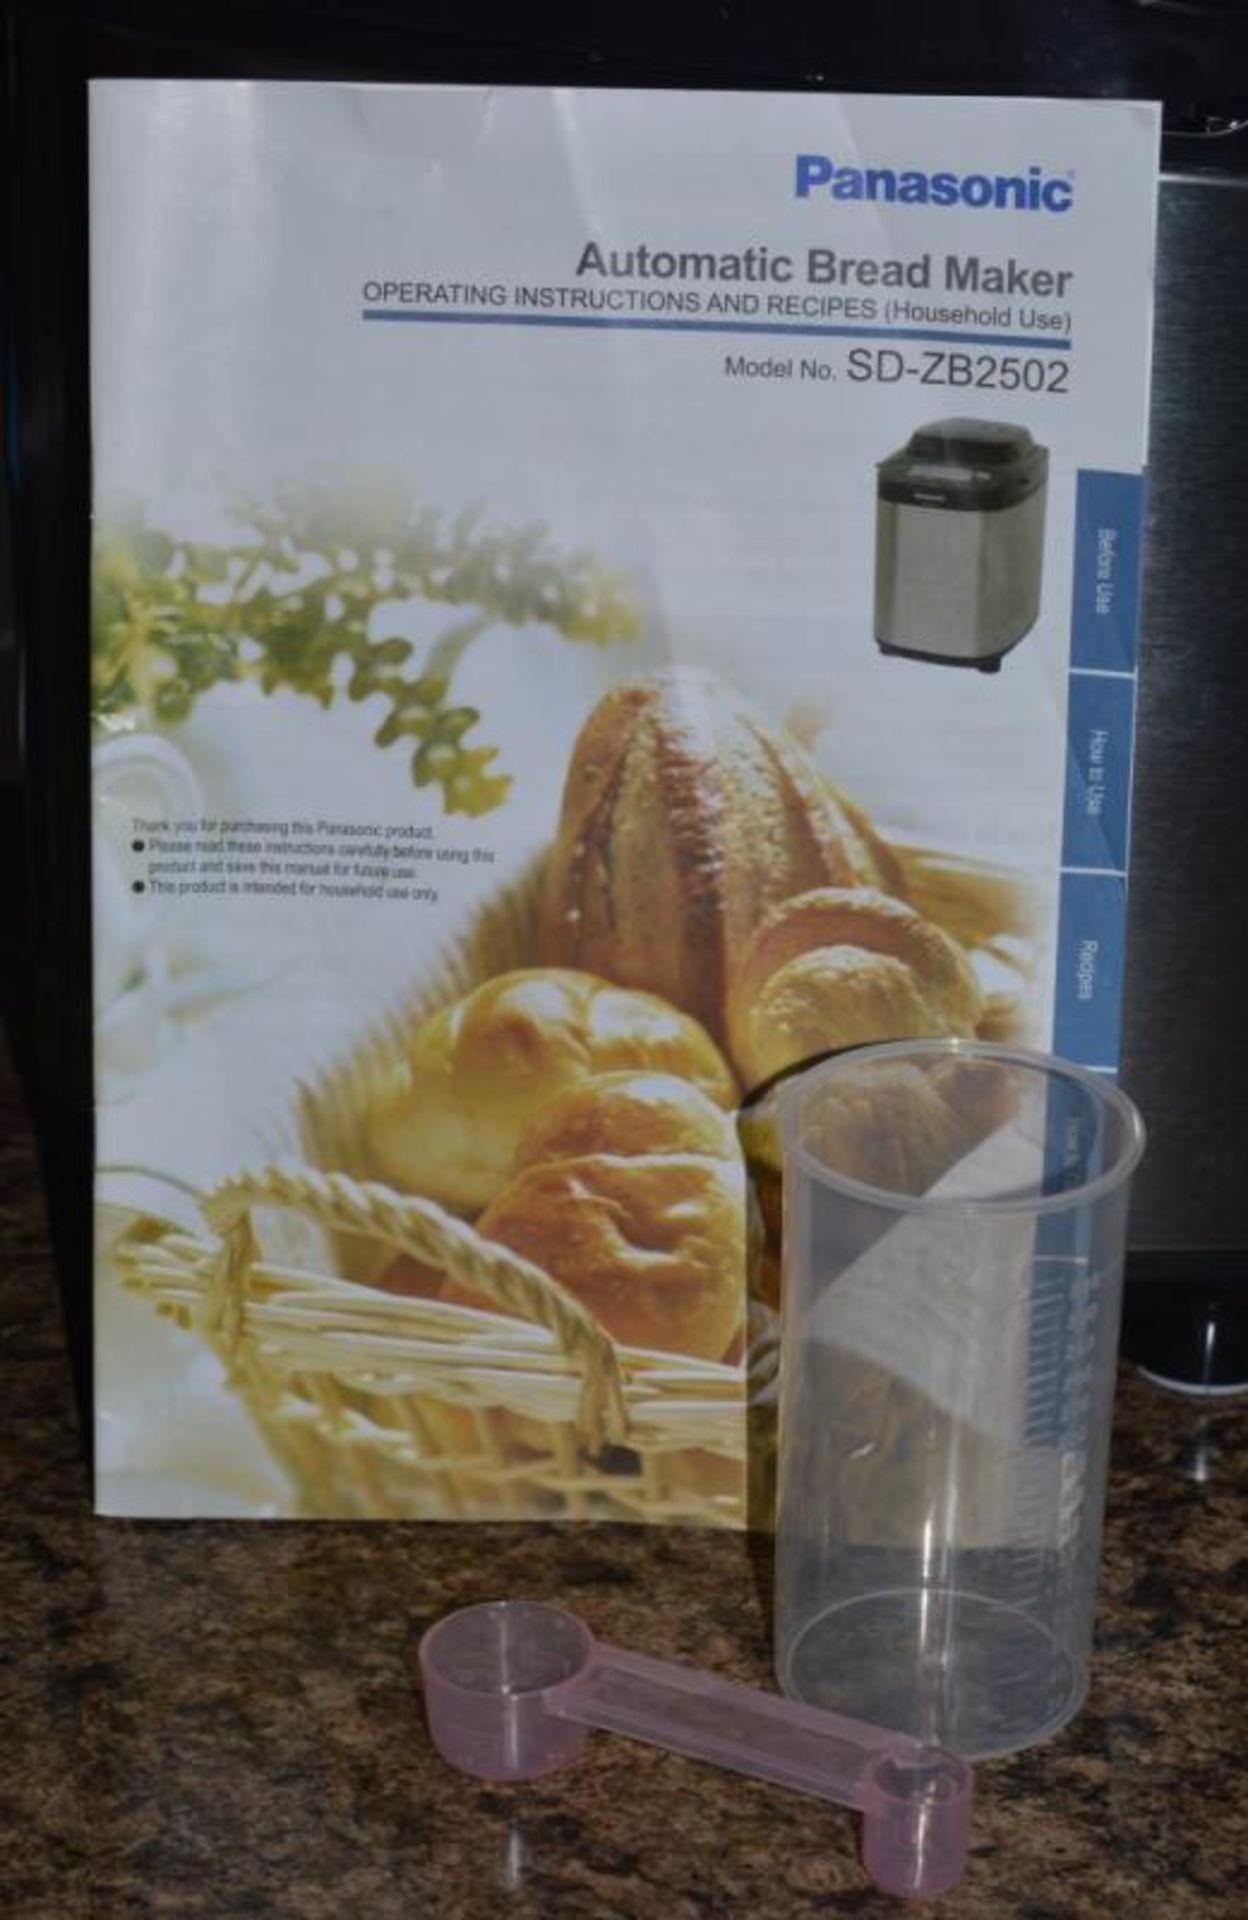 1 x Panasonic SD-ZB2502 Bread Maker - Stylish Stainless Steel Finish - Clean Inside and Out - Good W - Image 3 of 5